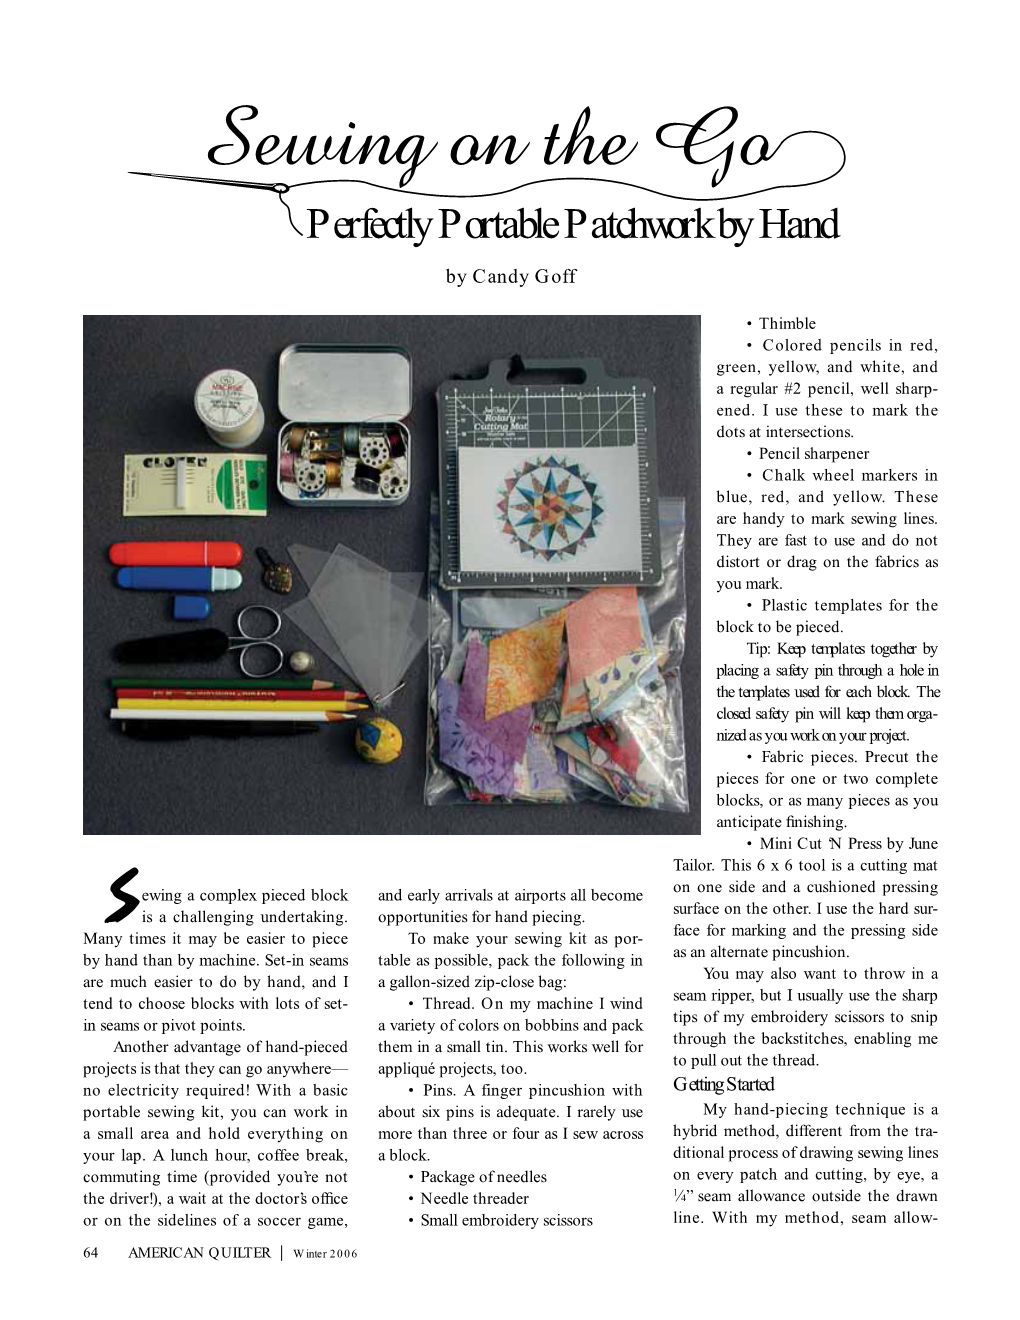 Sewing on the Go: Perfectly Portable Patchwork by Hand by Candy Goff